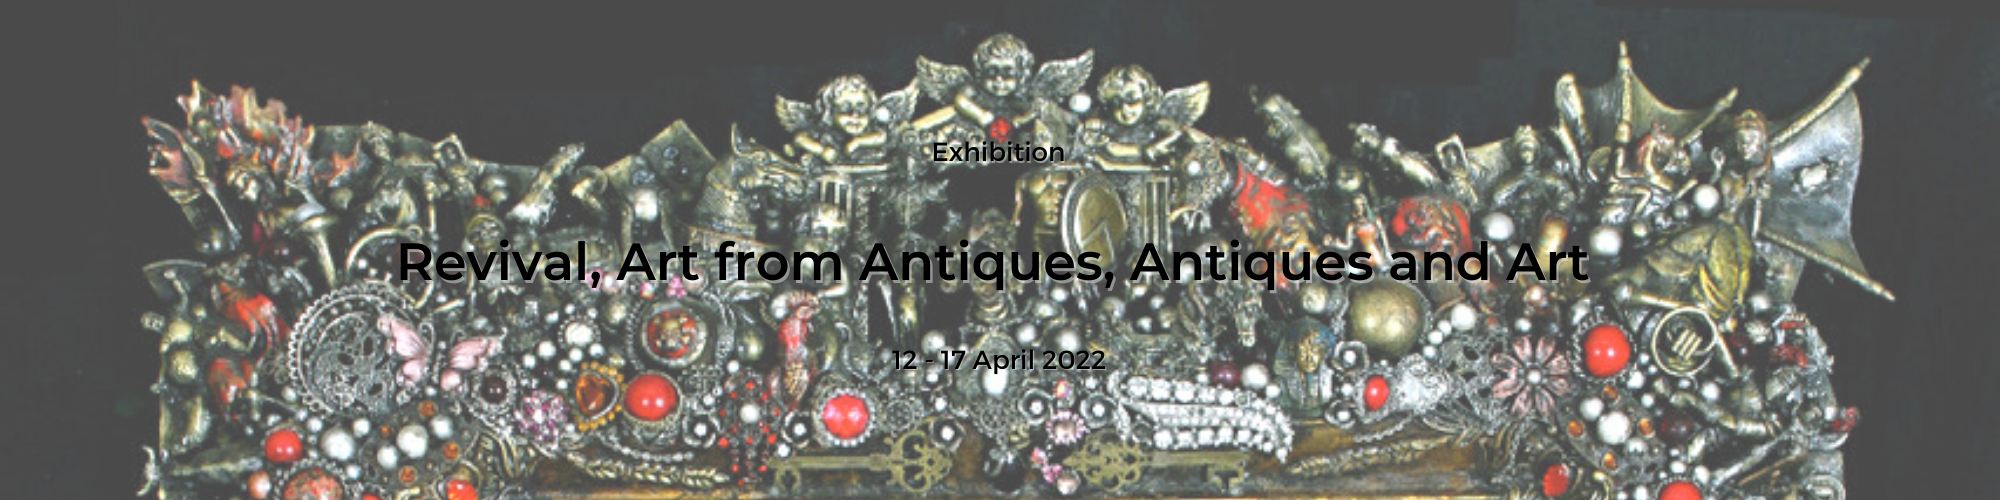 “Revival, Art from Antiques, Antiques and Art” Exhibition